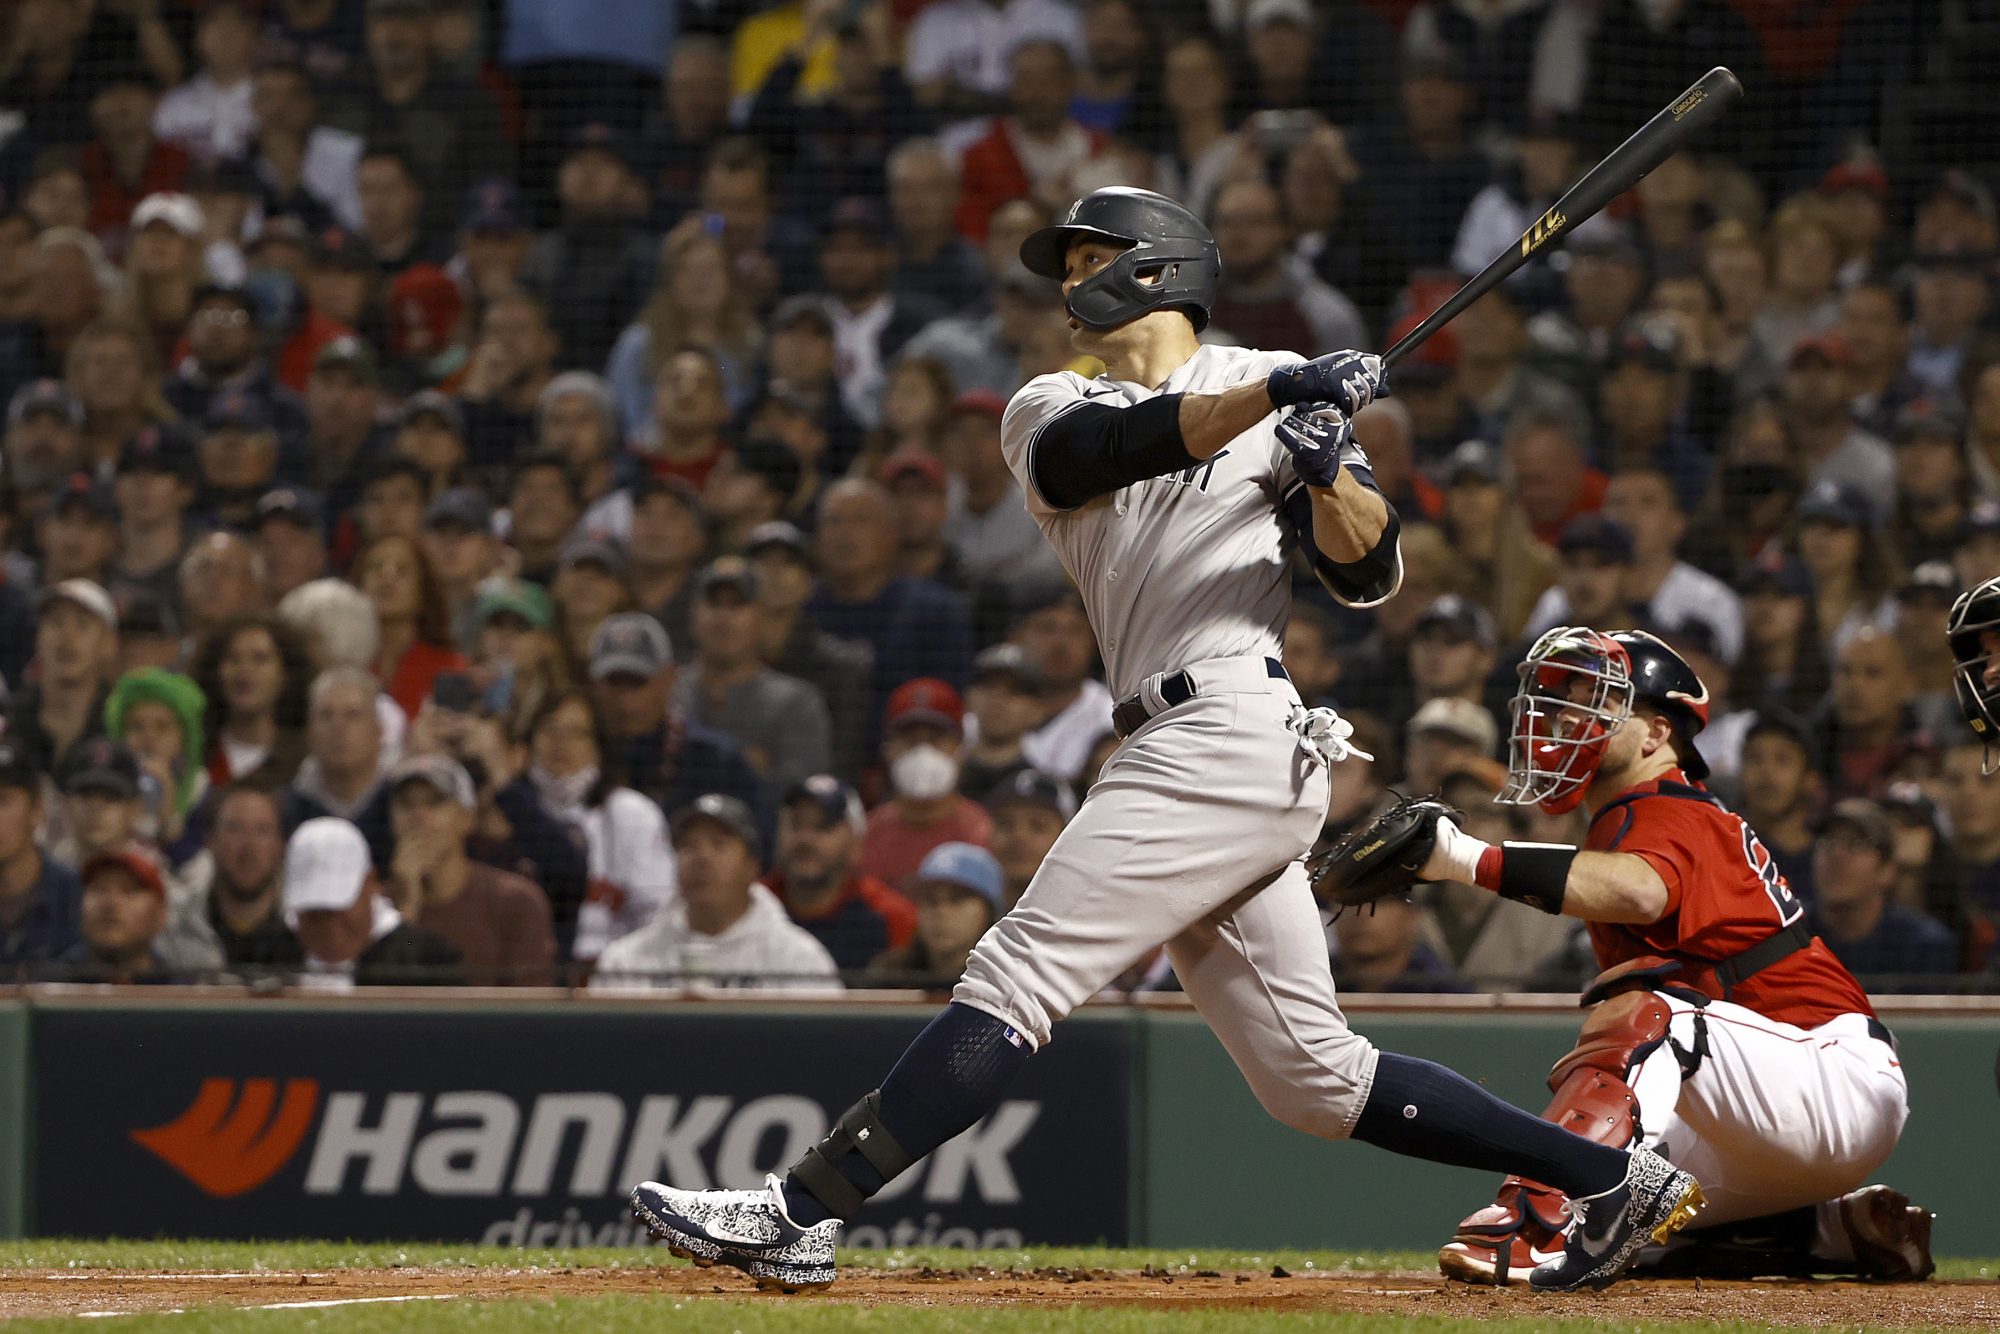 Giancarlo Stanton of the New York Yankees socks a mega dinger off the wall in left, for a single.